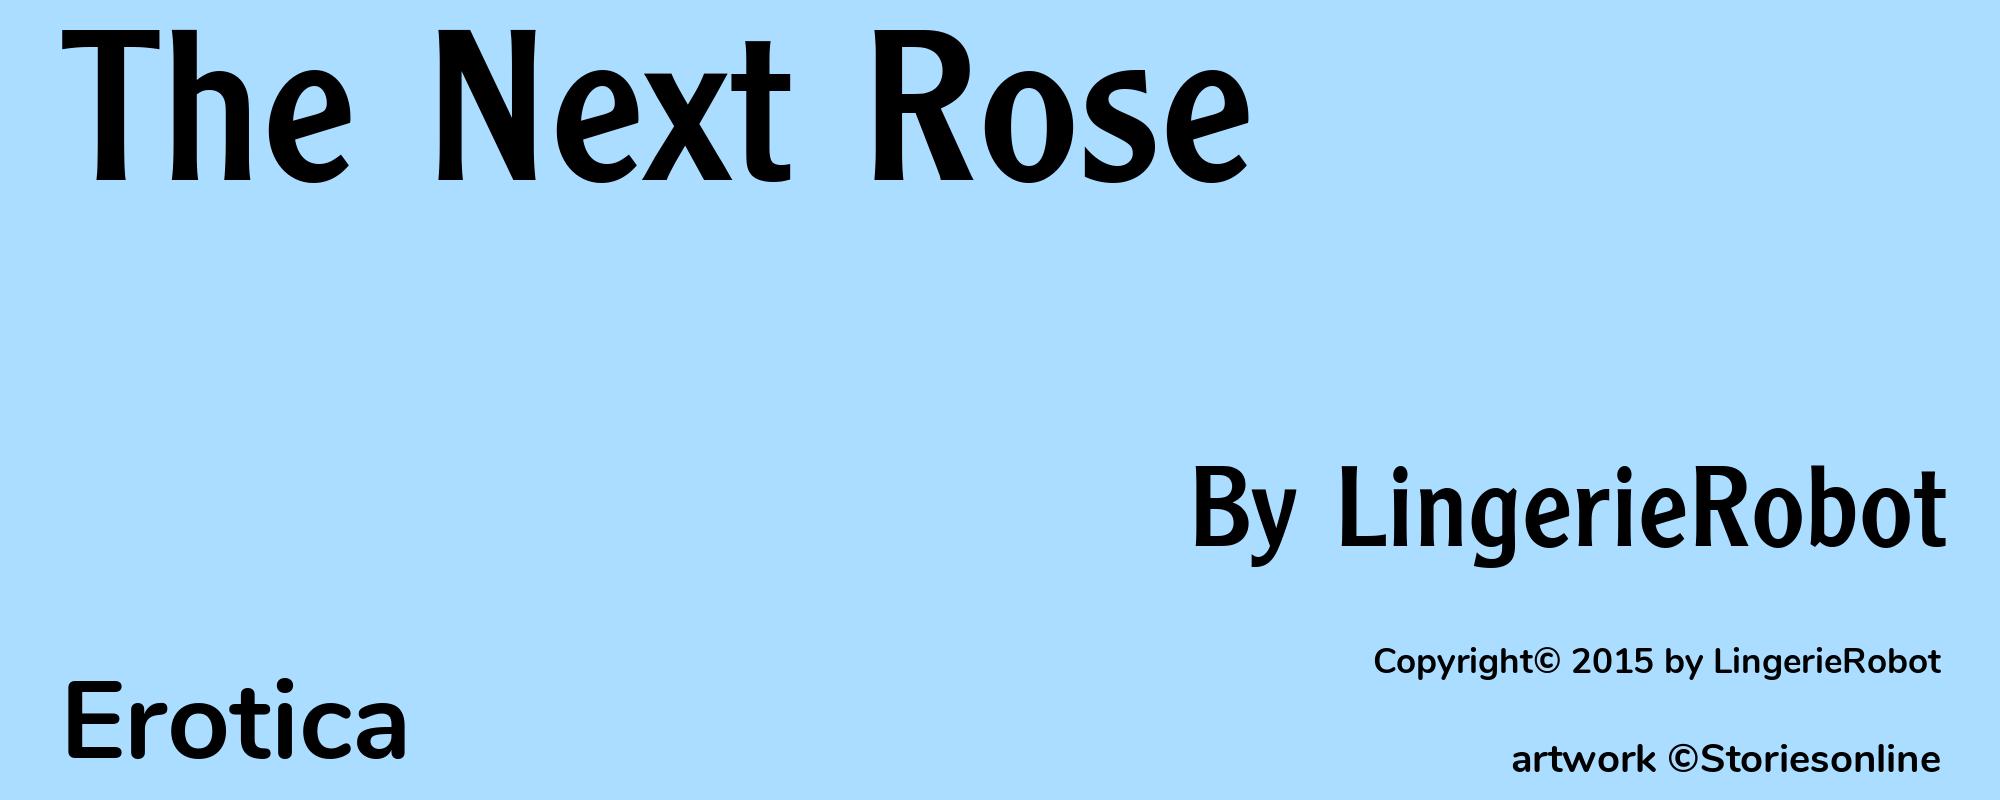 The Next Rose - Cover